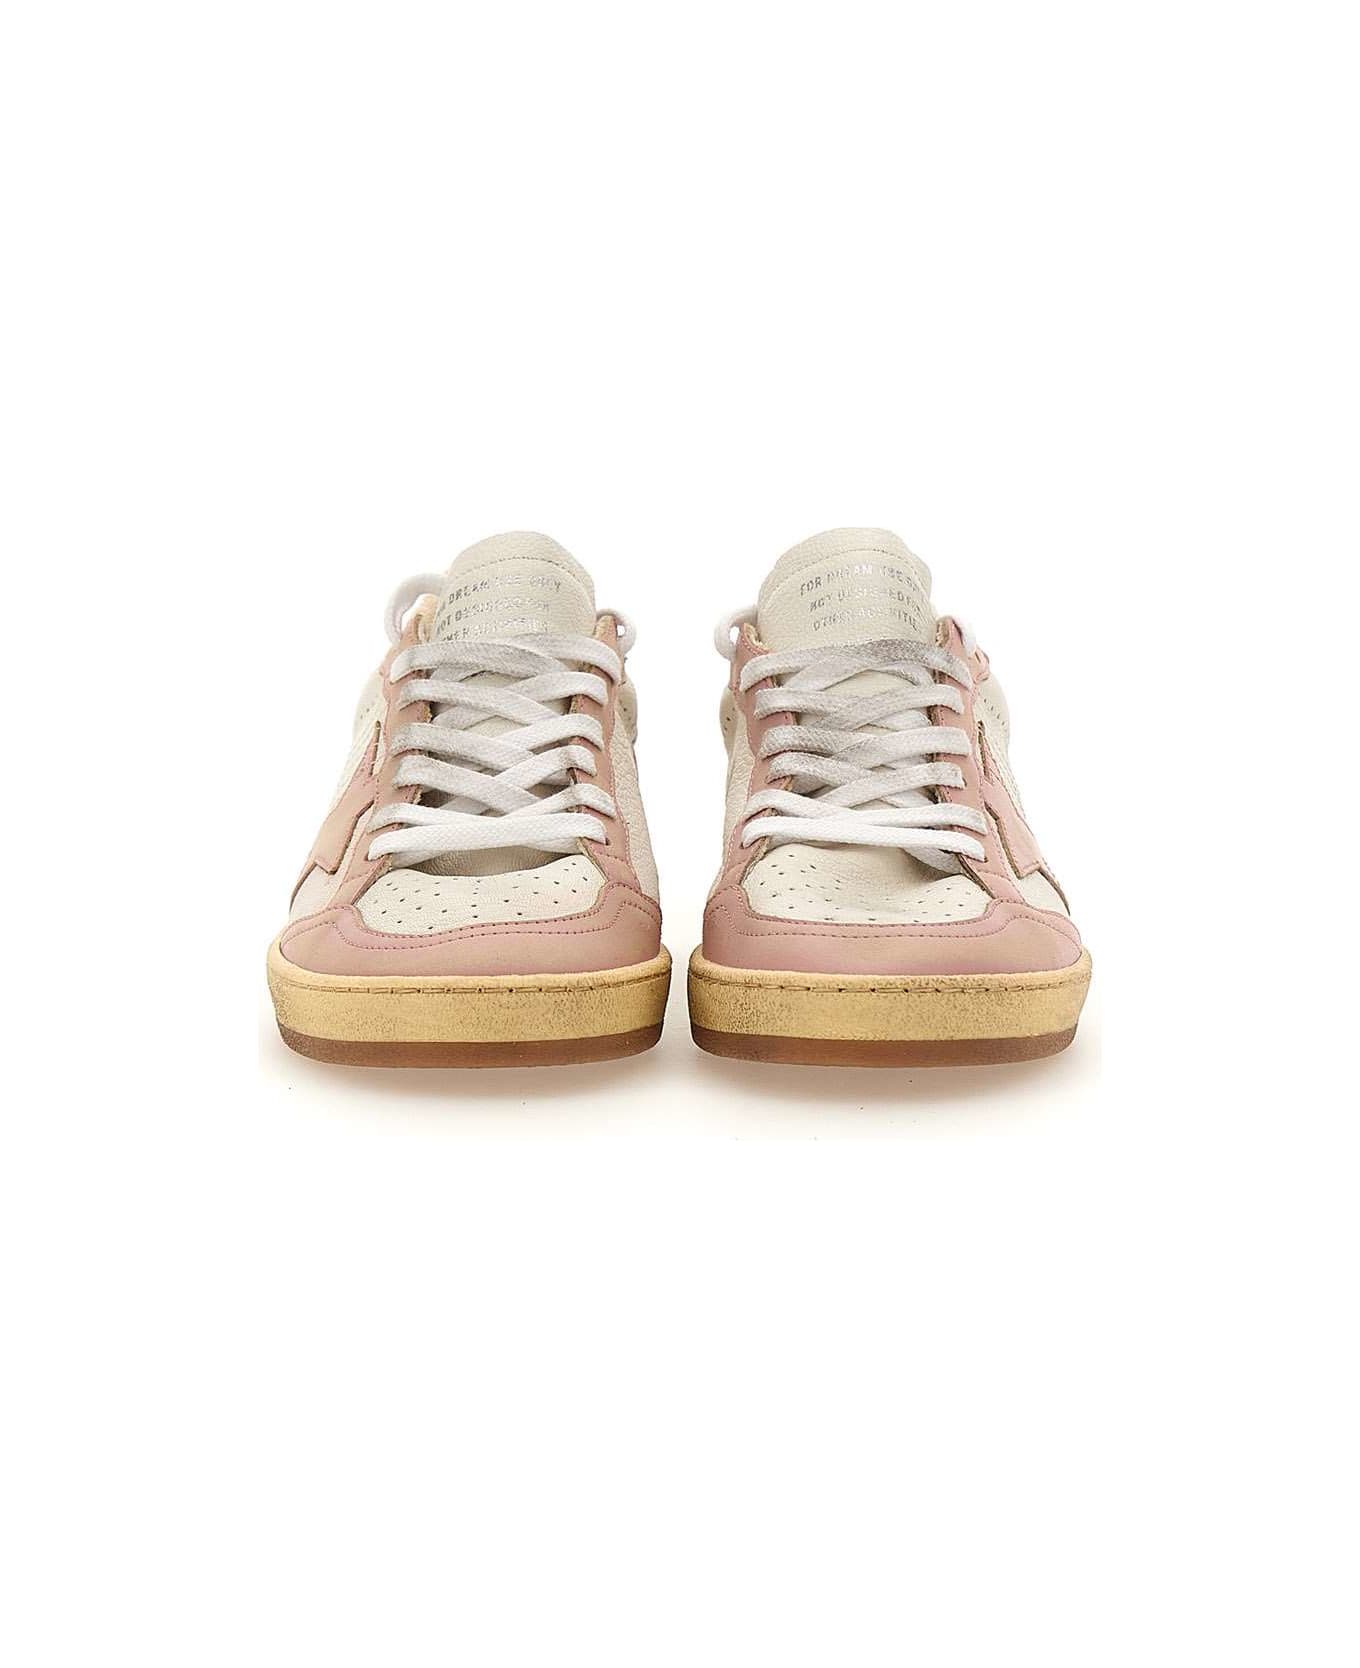 Golden Goose Ball Star Leather Sneakers - White/Pink